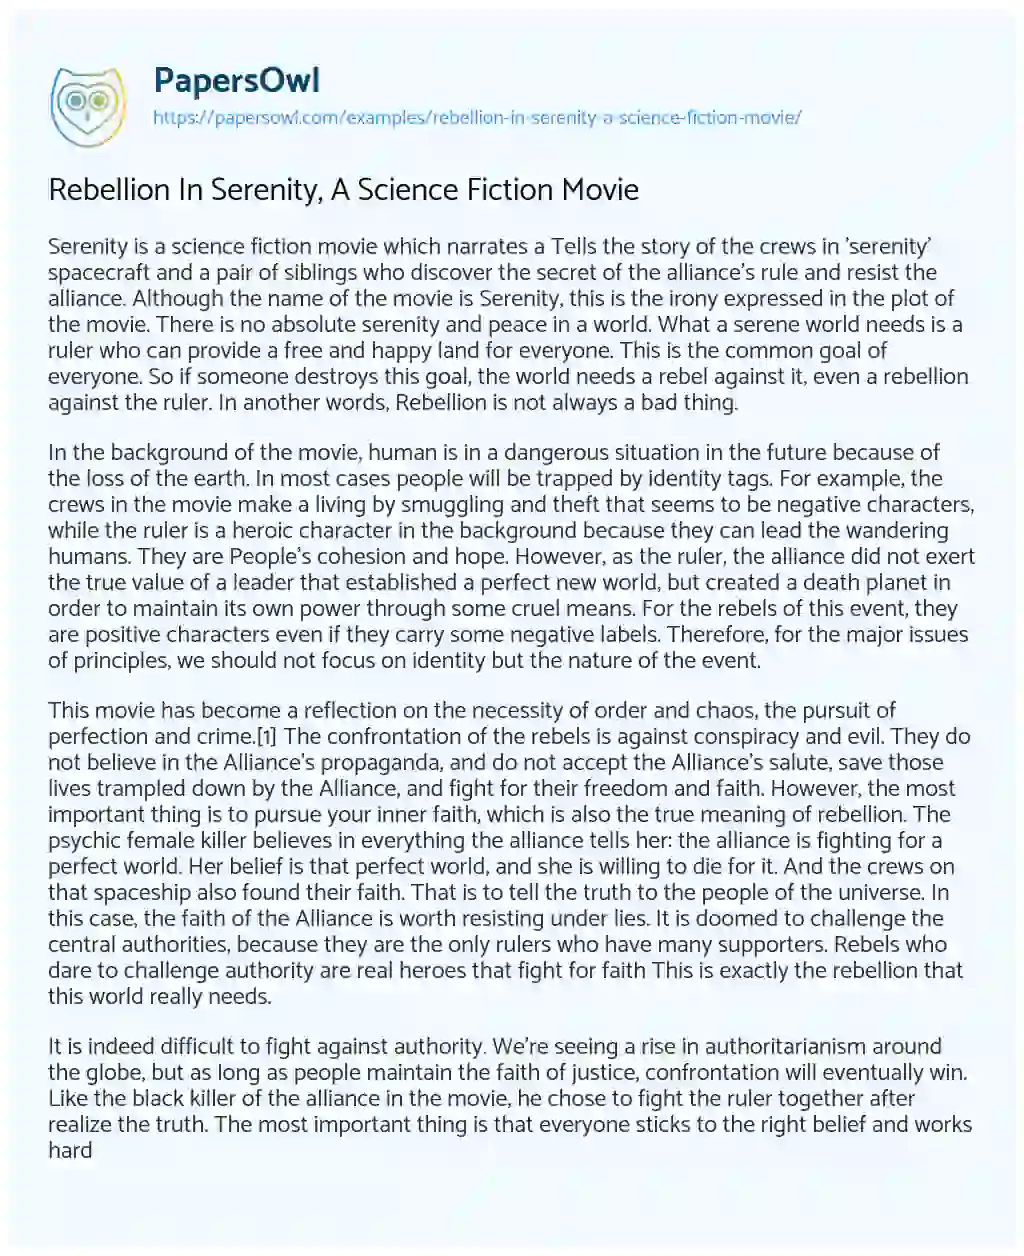 Rebellion in Serenity, a Science Fiction Movie essay